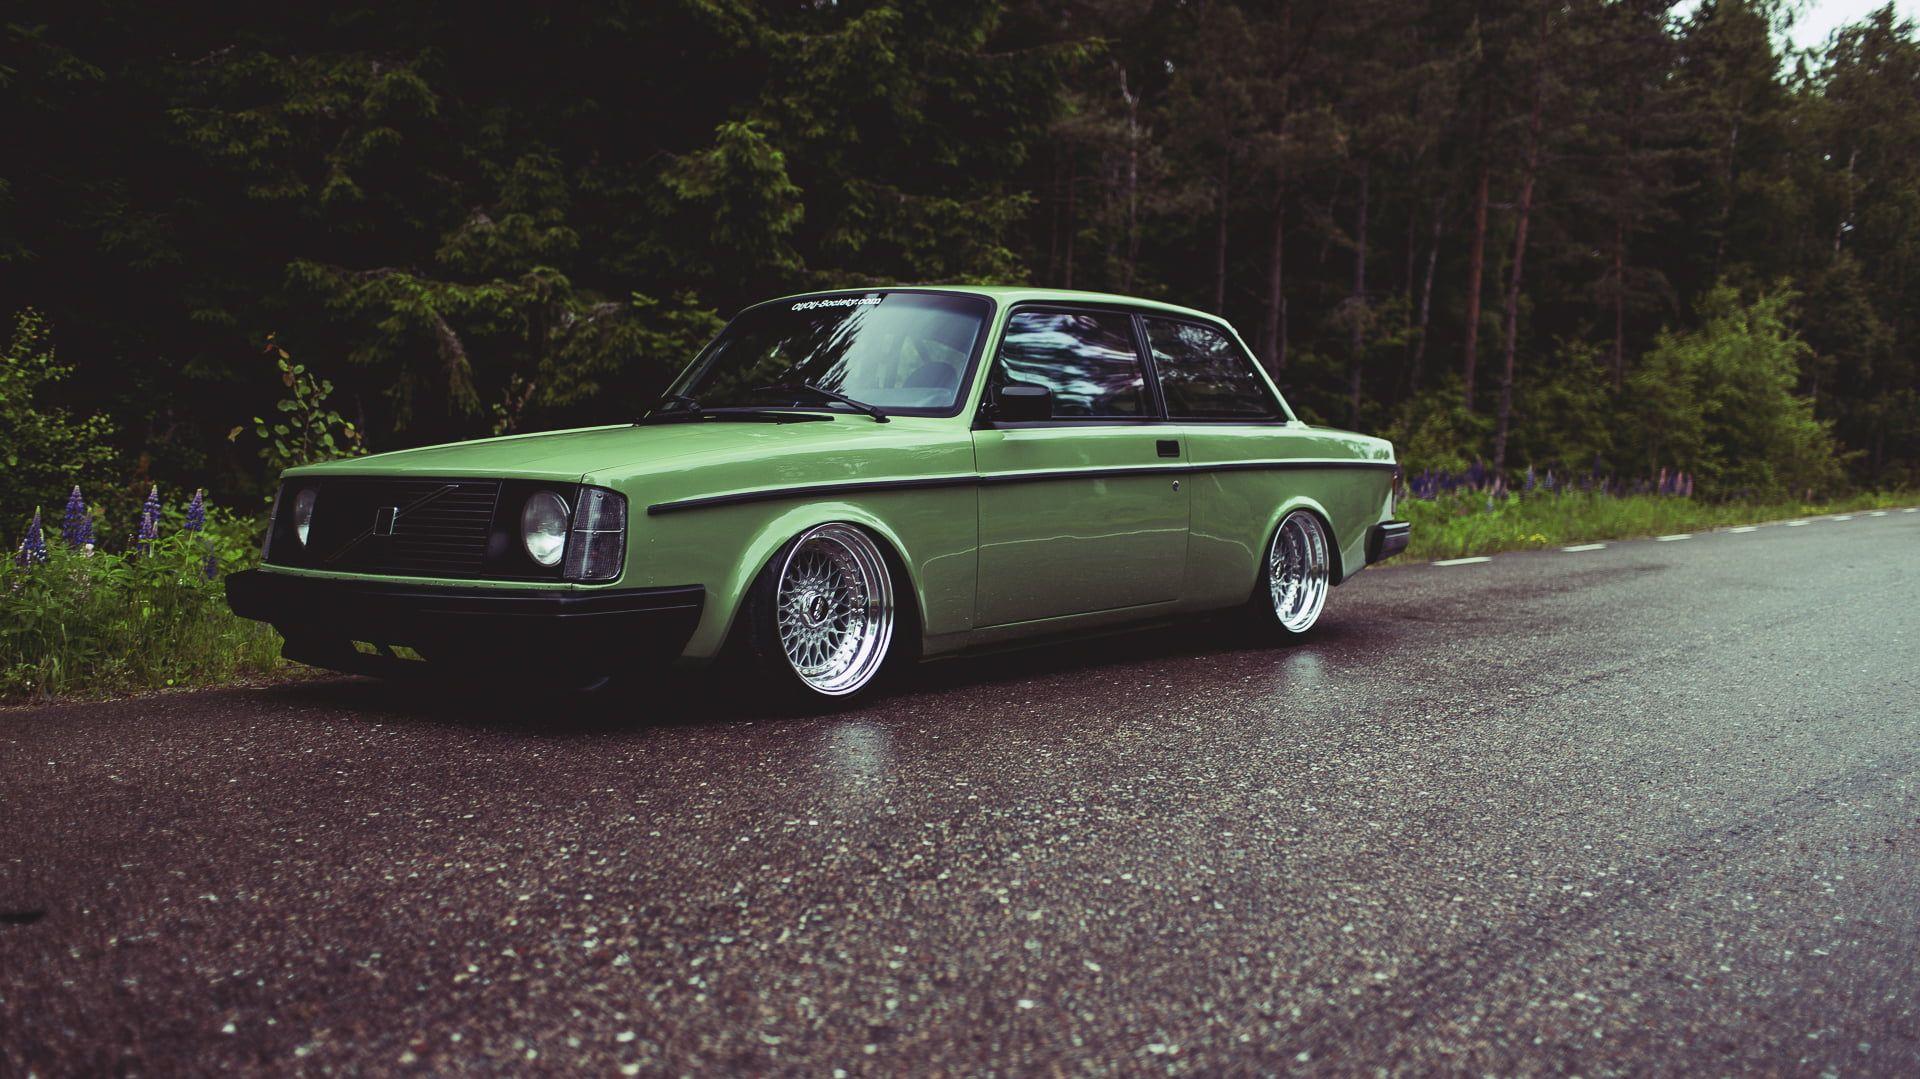 Green Coupe Road Forest Volvo 1080p Wallpaper